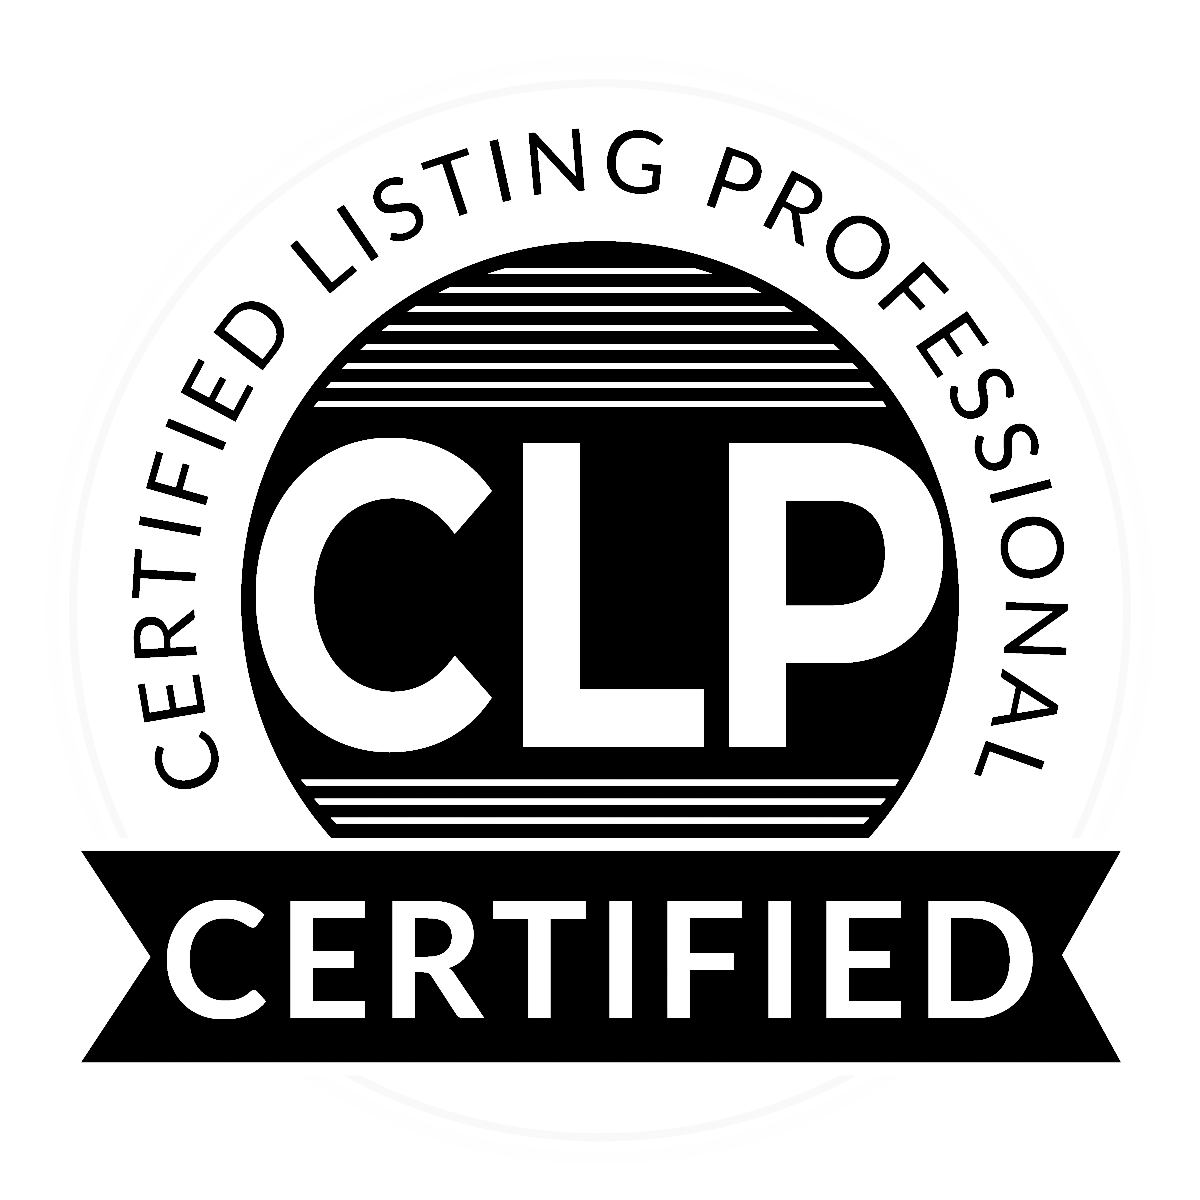 The logo of LISTING PRO